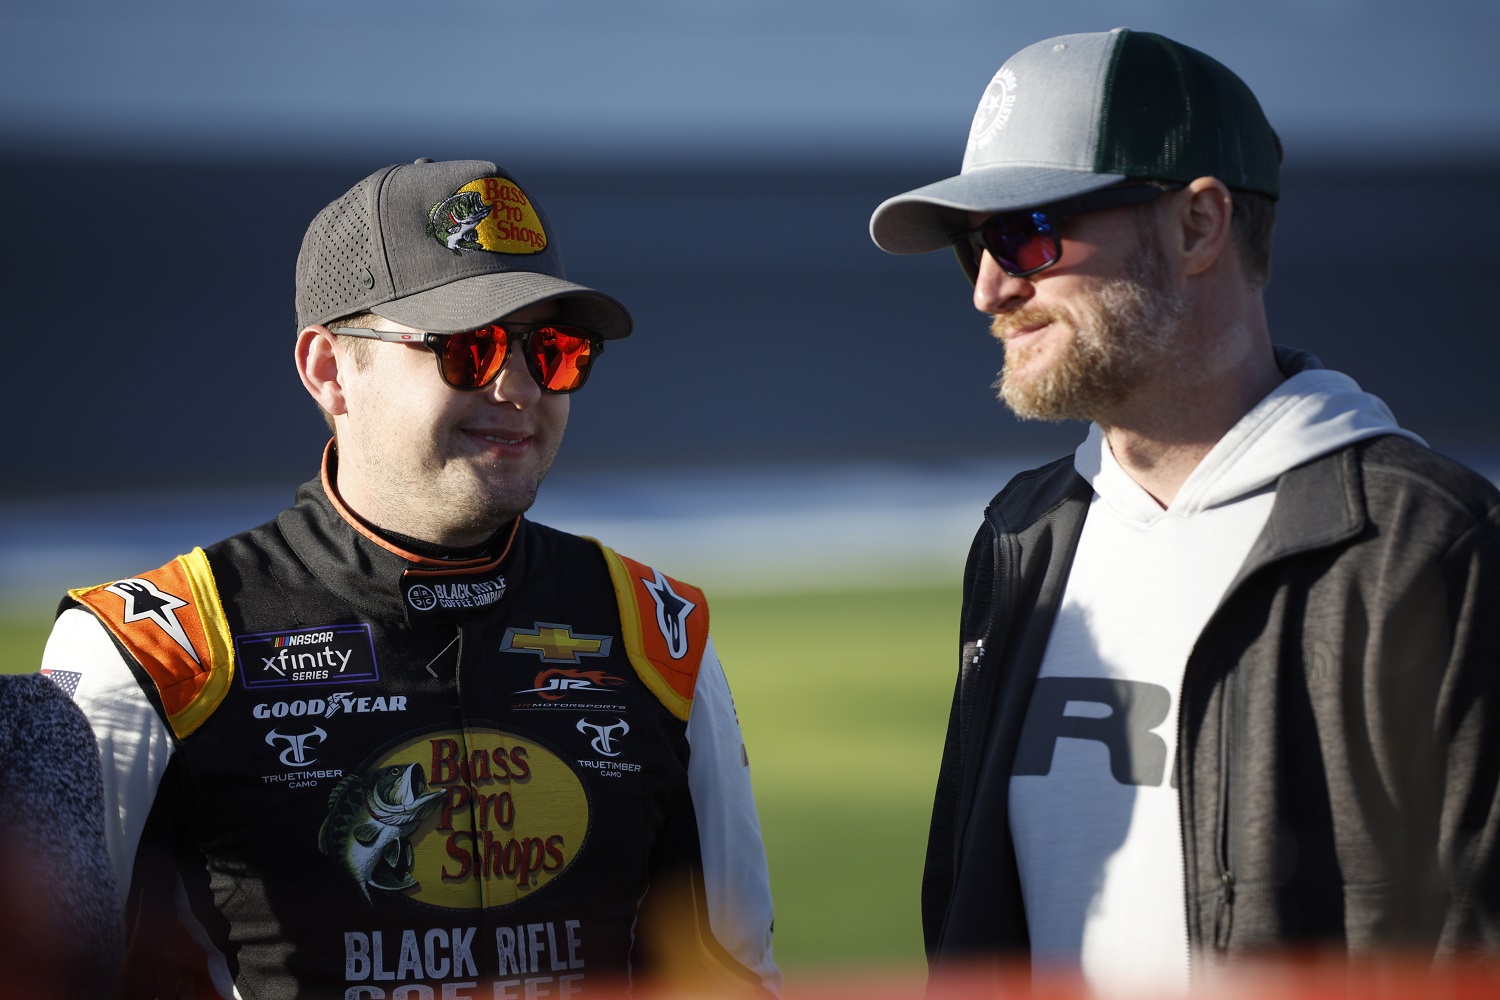 Dale Earnhardt Jr. Reveals the Impending Phone Call From Noah Gragson He’s Eager to Answer